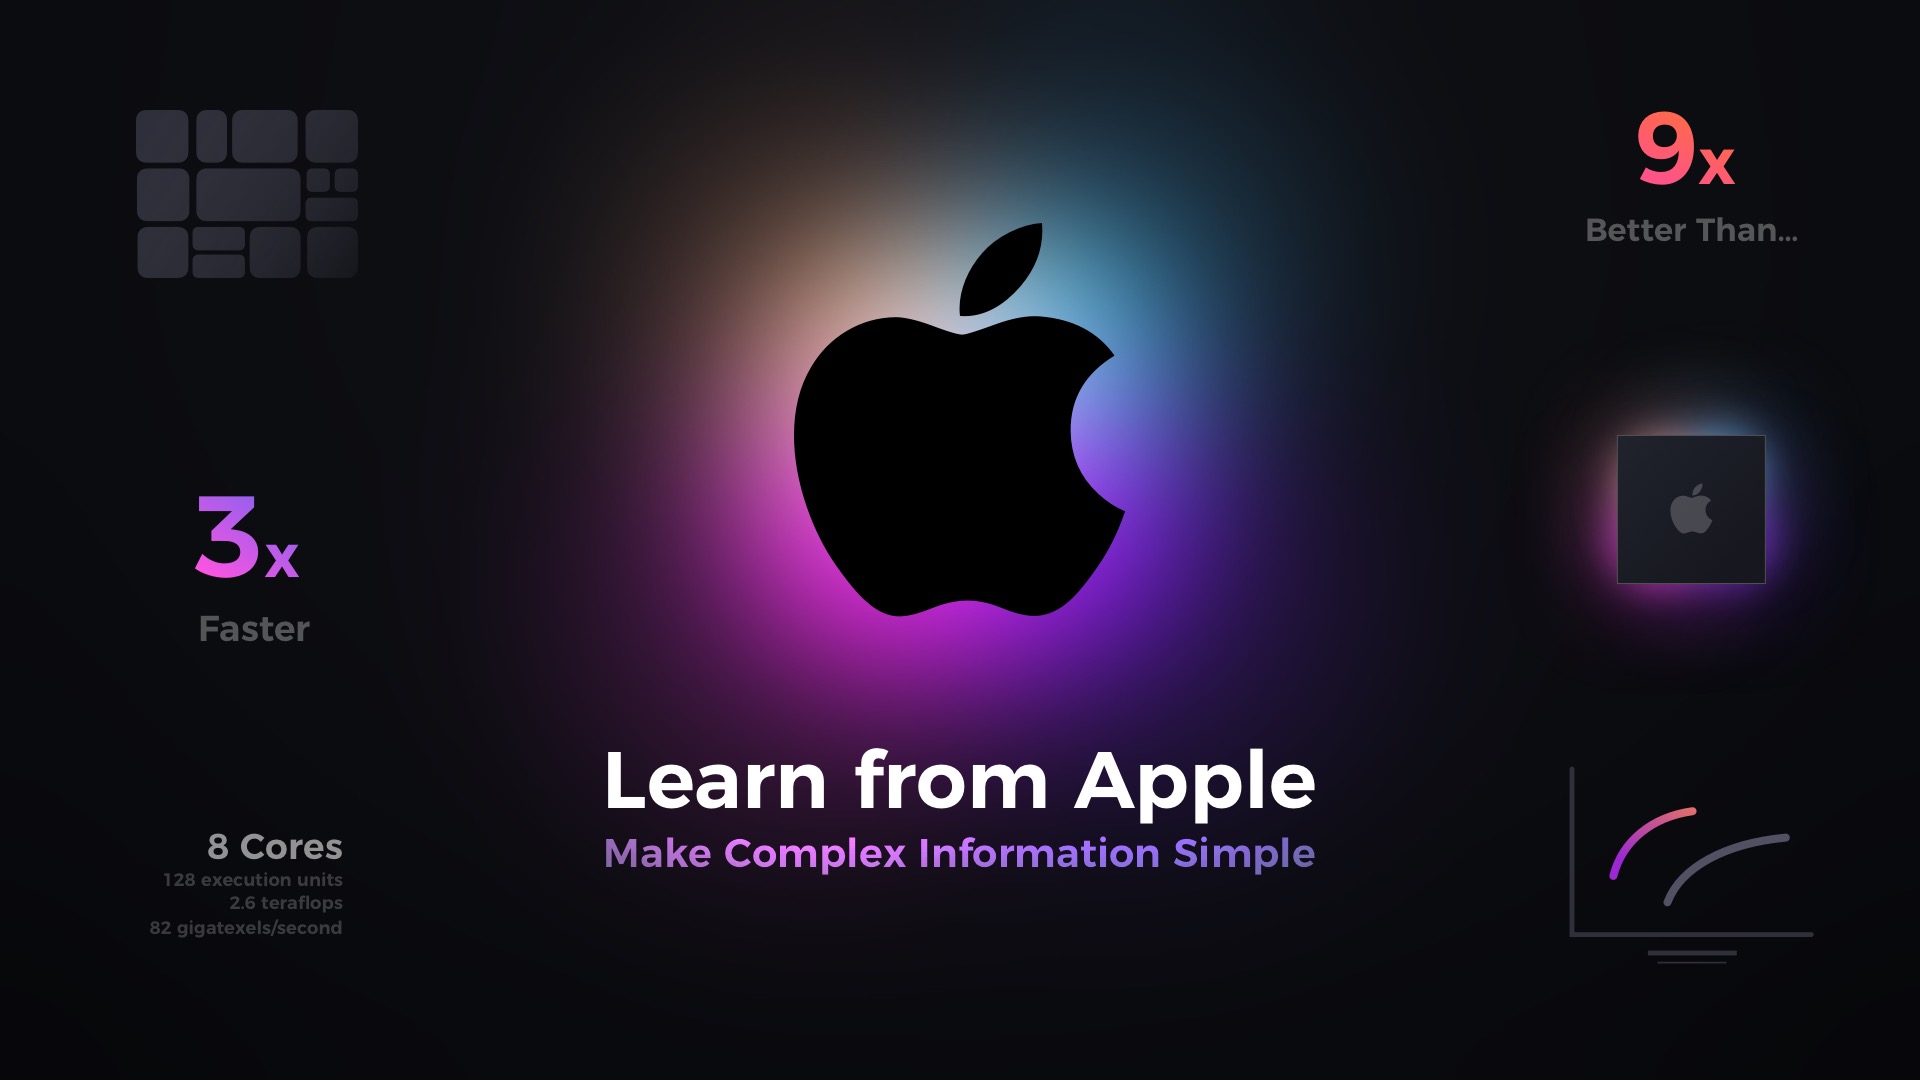 Learn from Apple - featured image